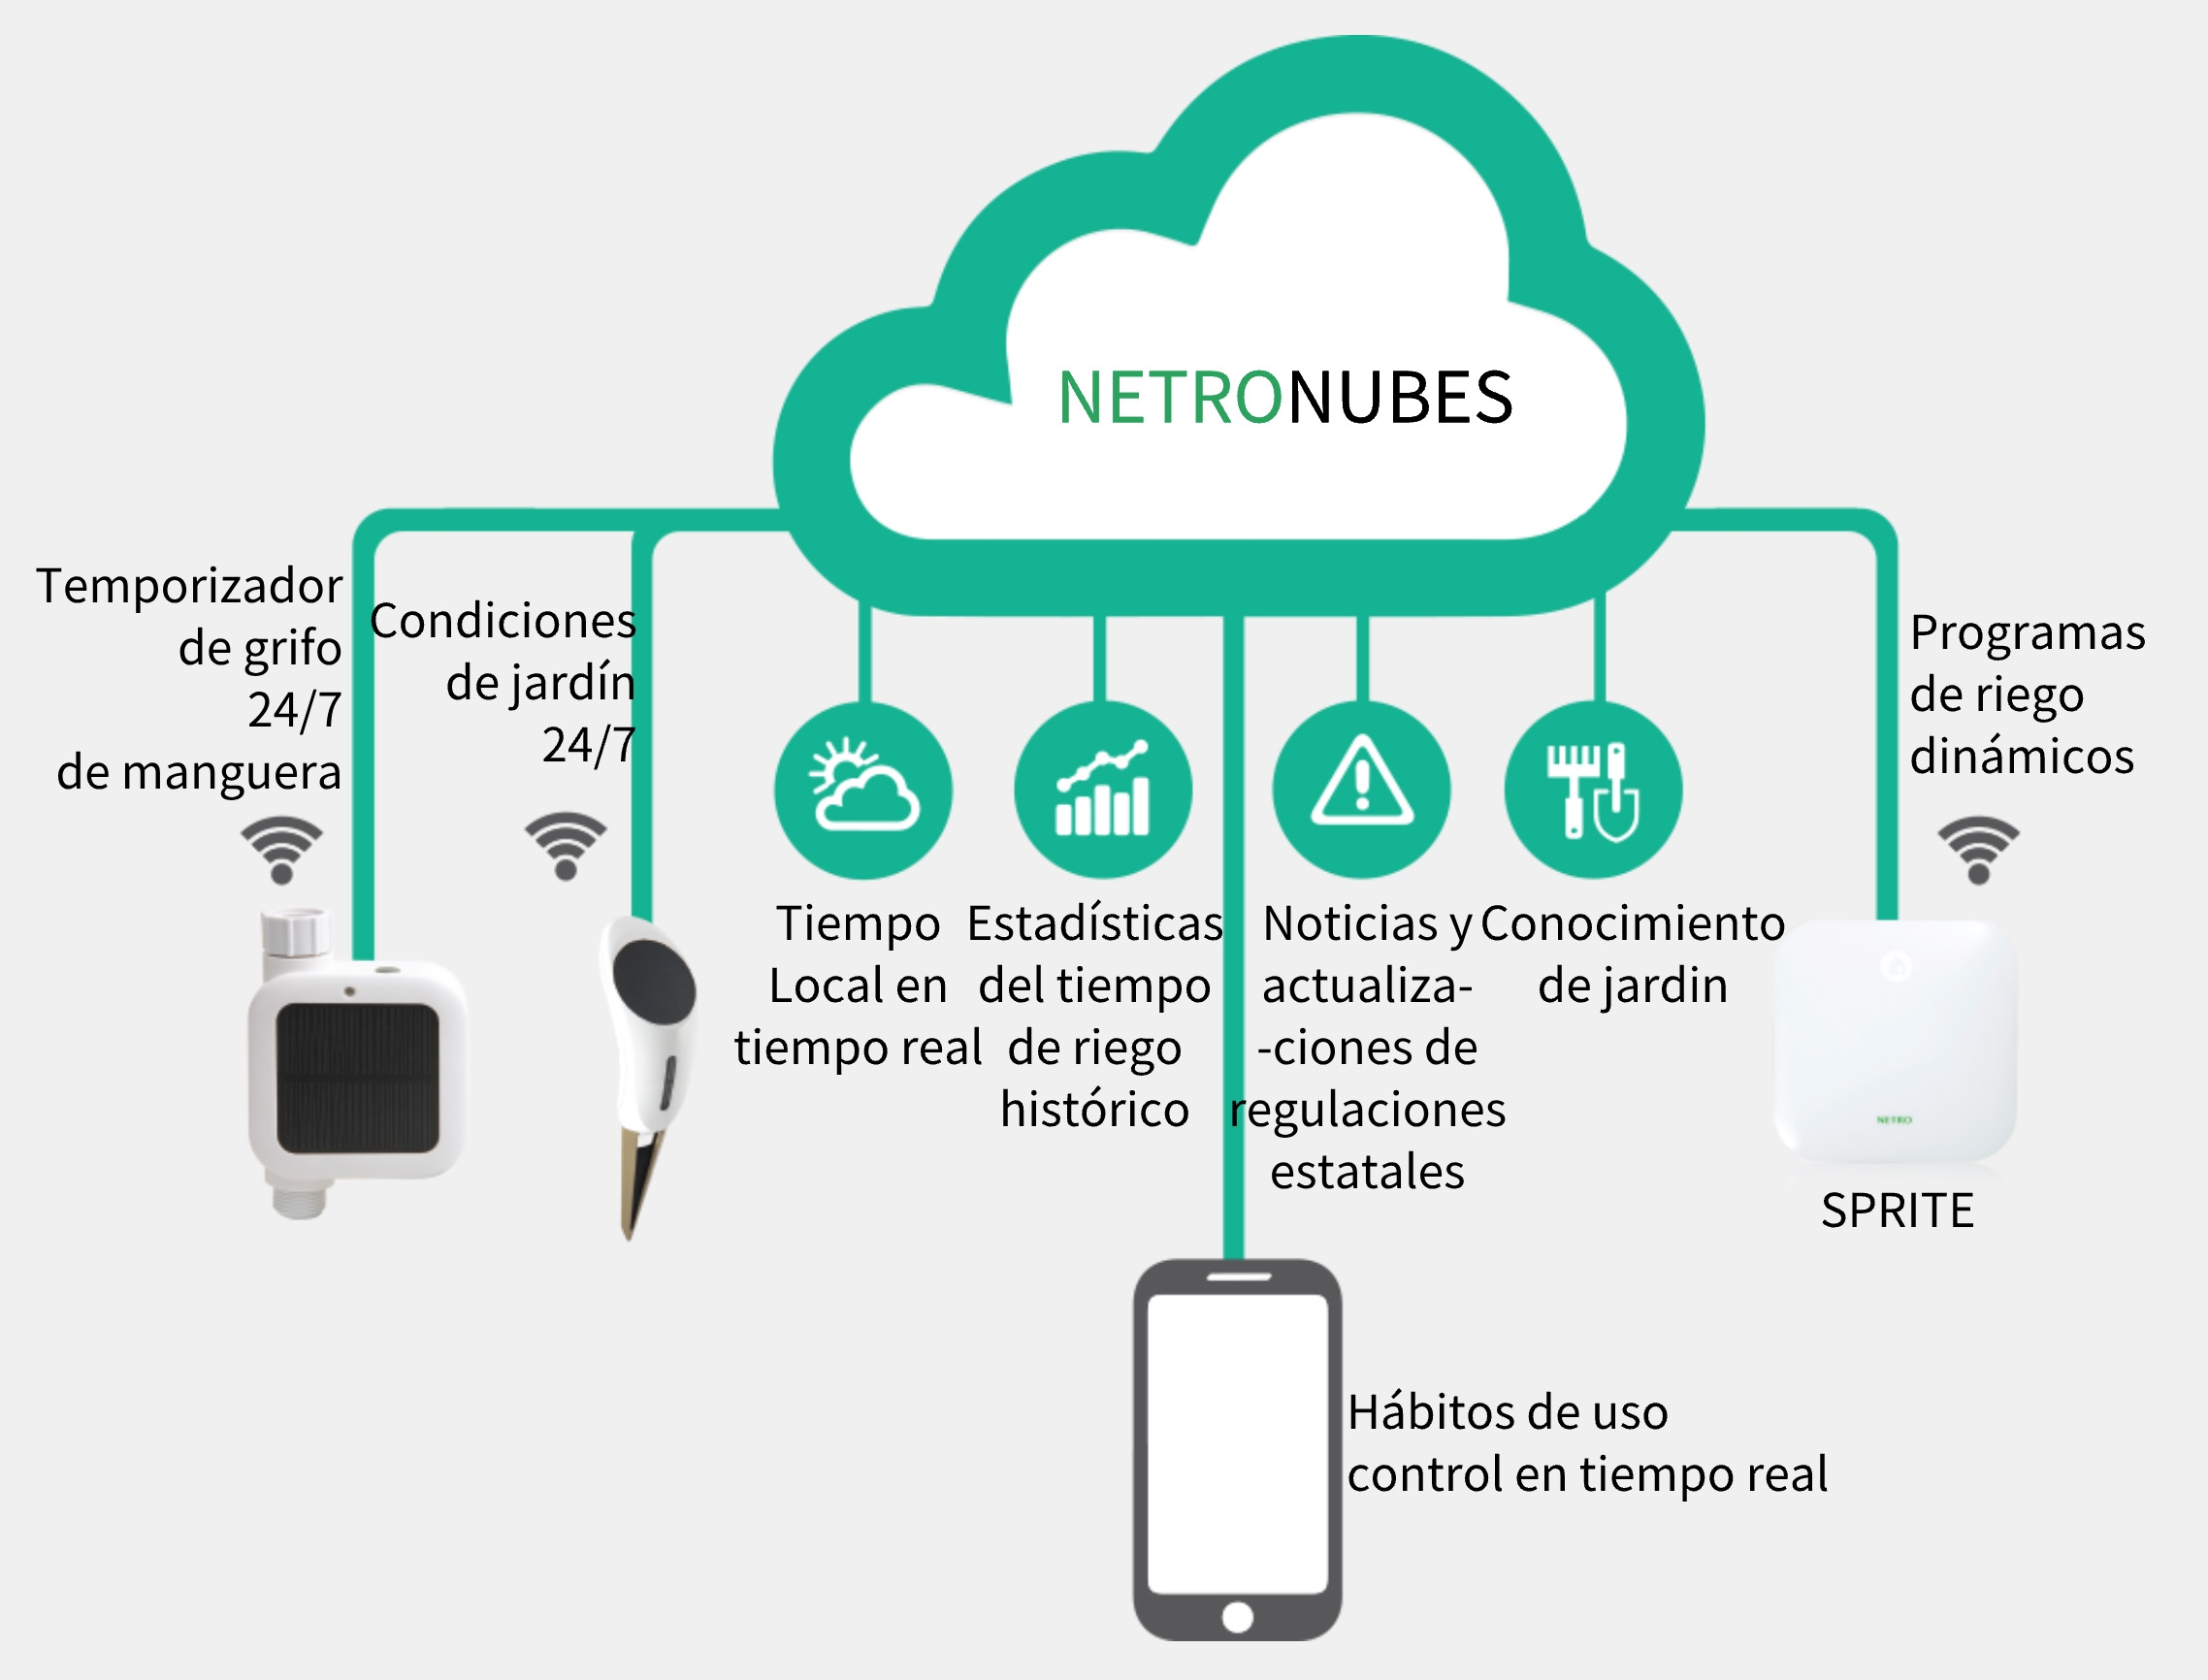 Netro has its own clound service. Netro's product operates fully automatically.